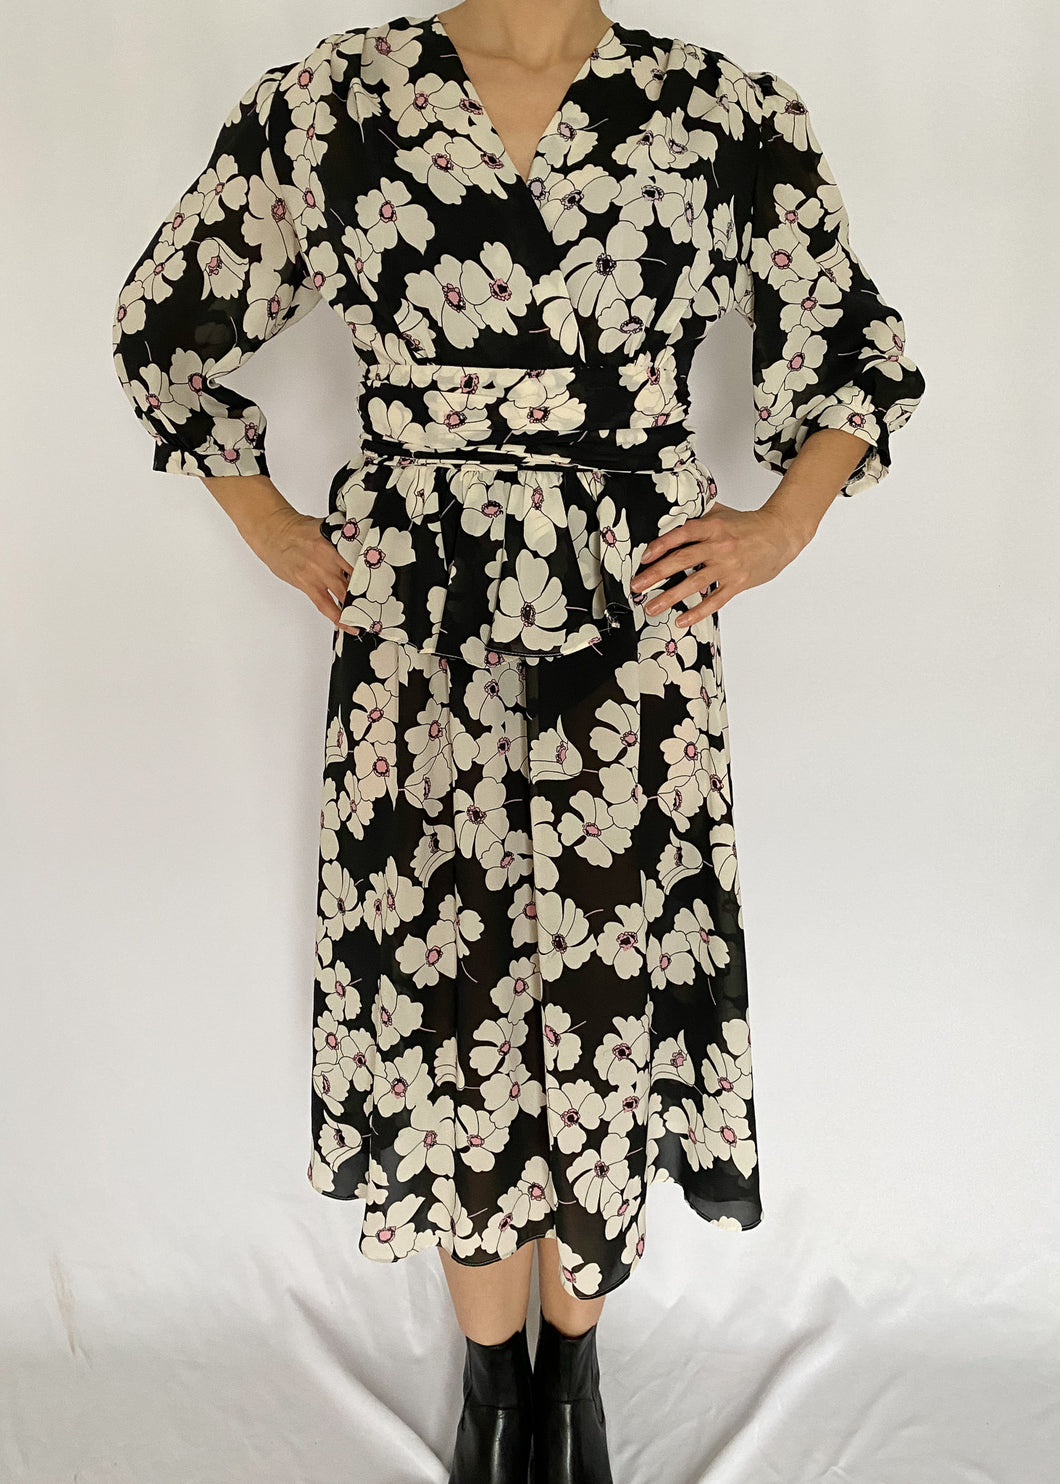 80's Black and White Floral Dress